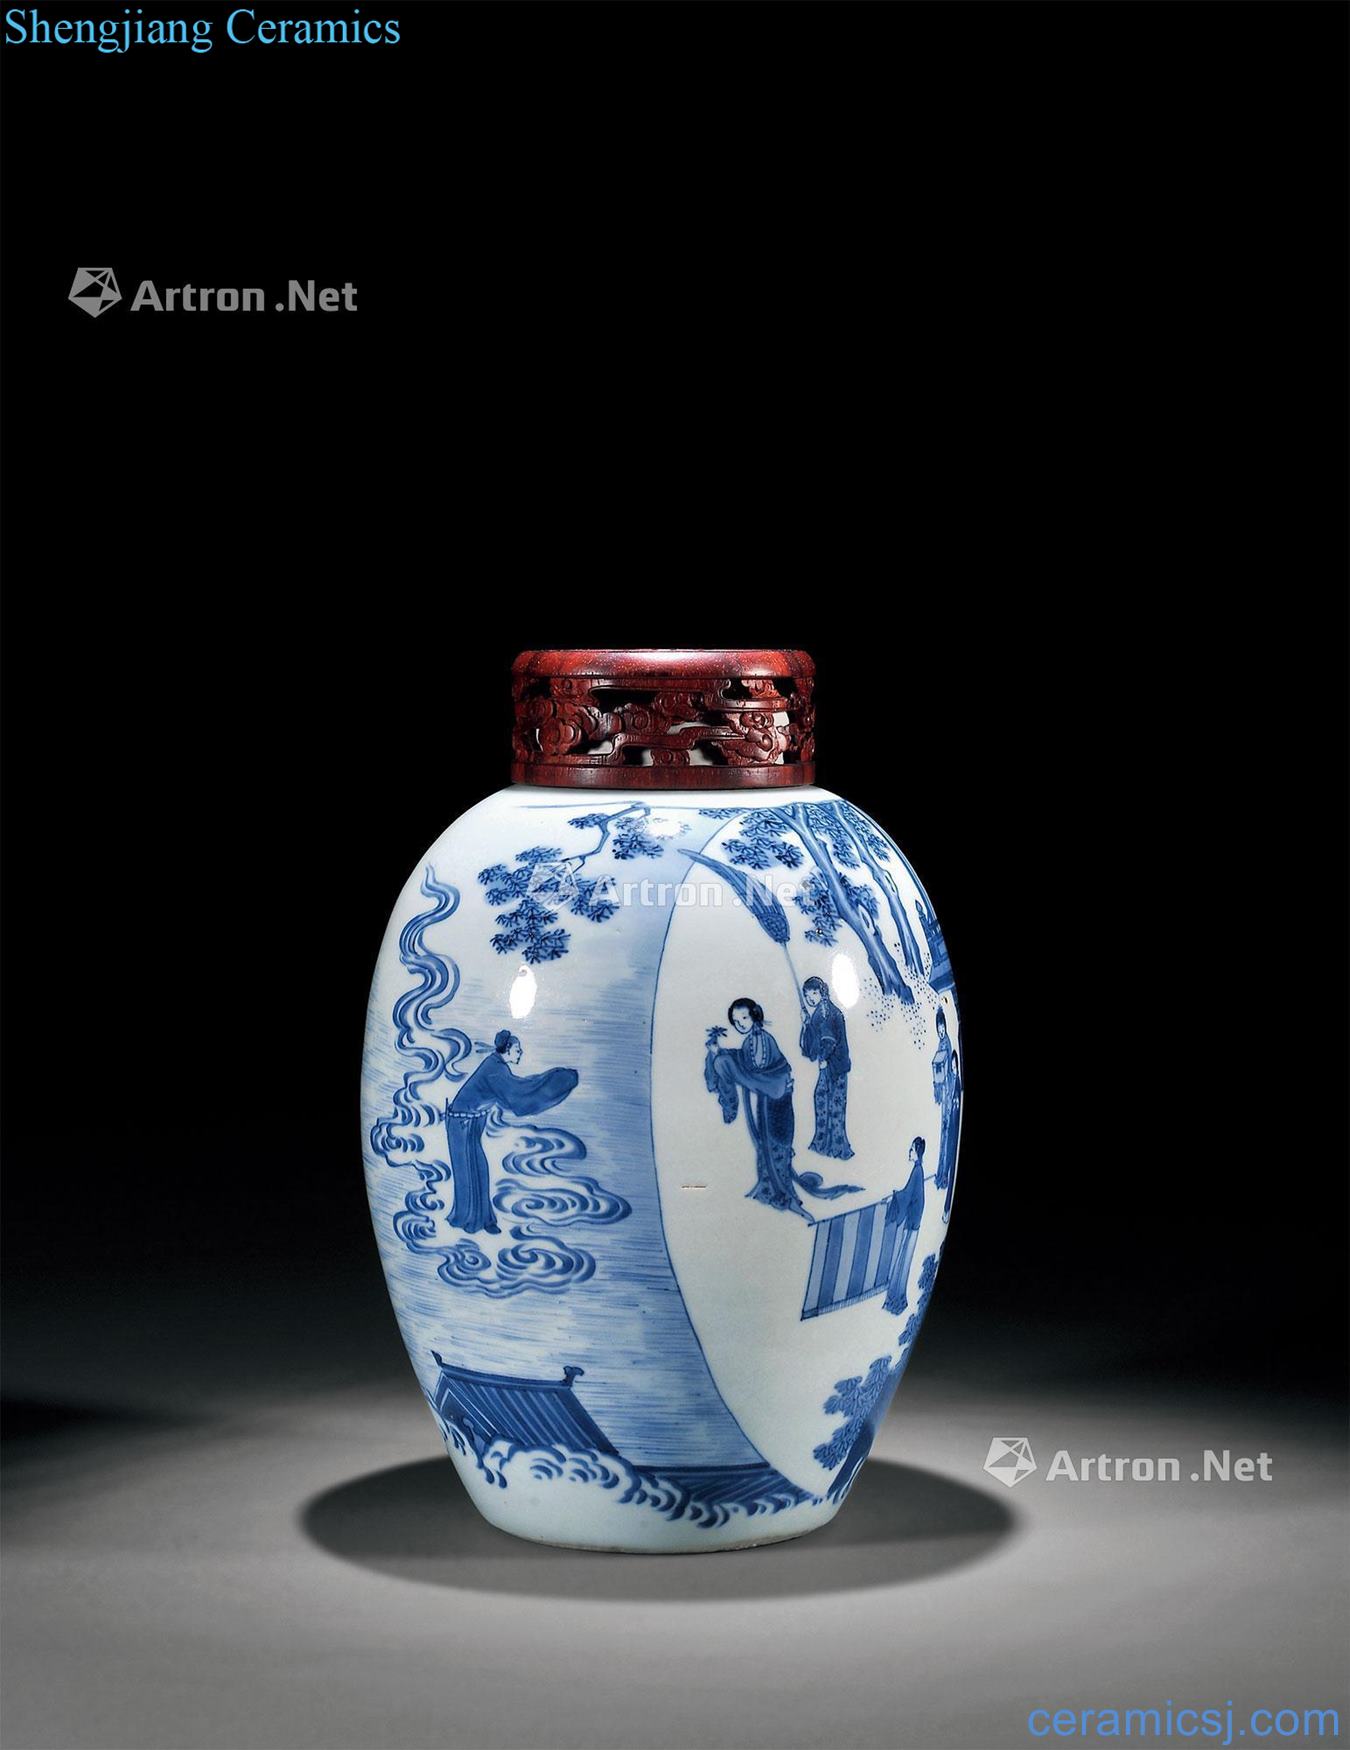 The late Ming dynasty Blue and white figure poetry can receive government degrees and